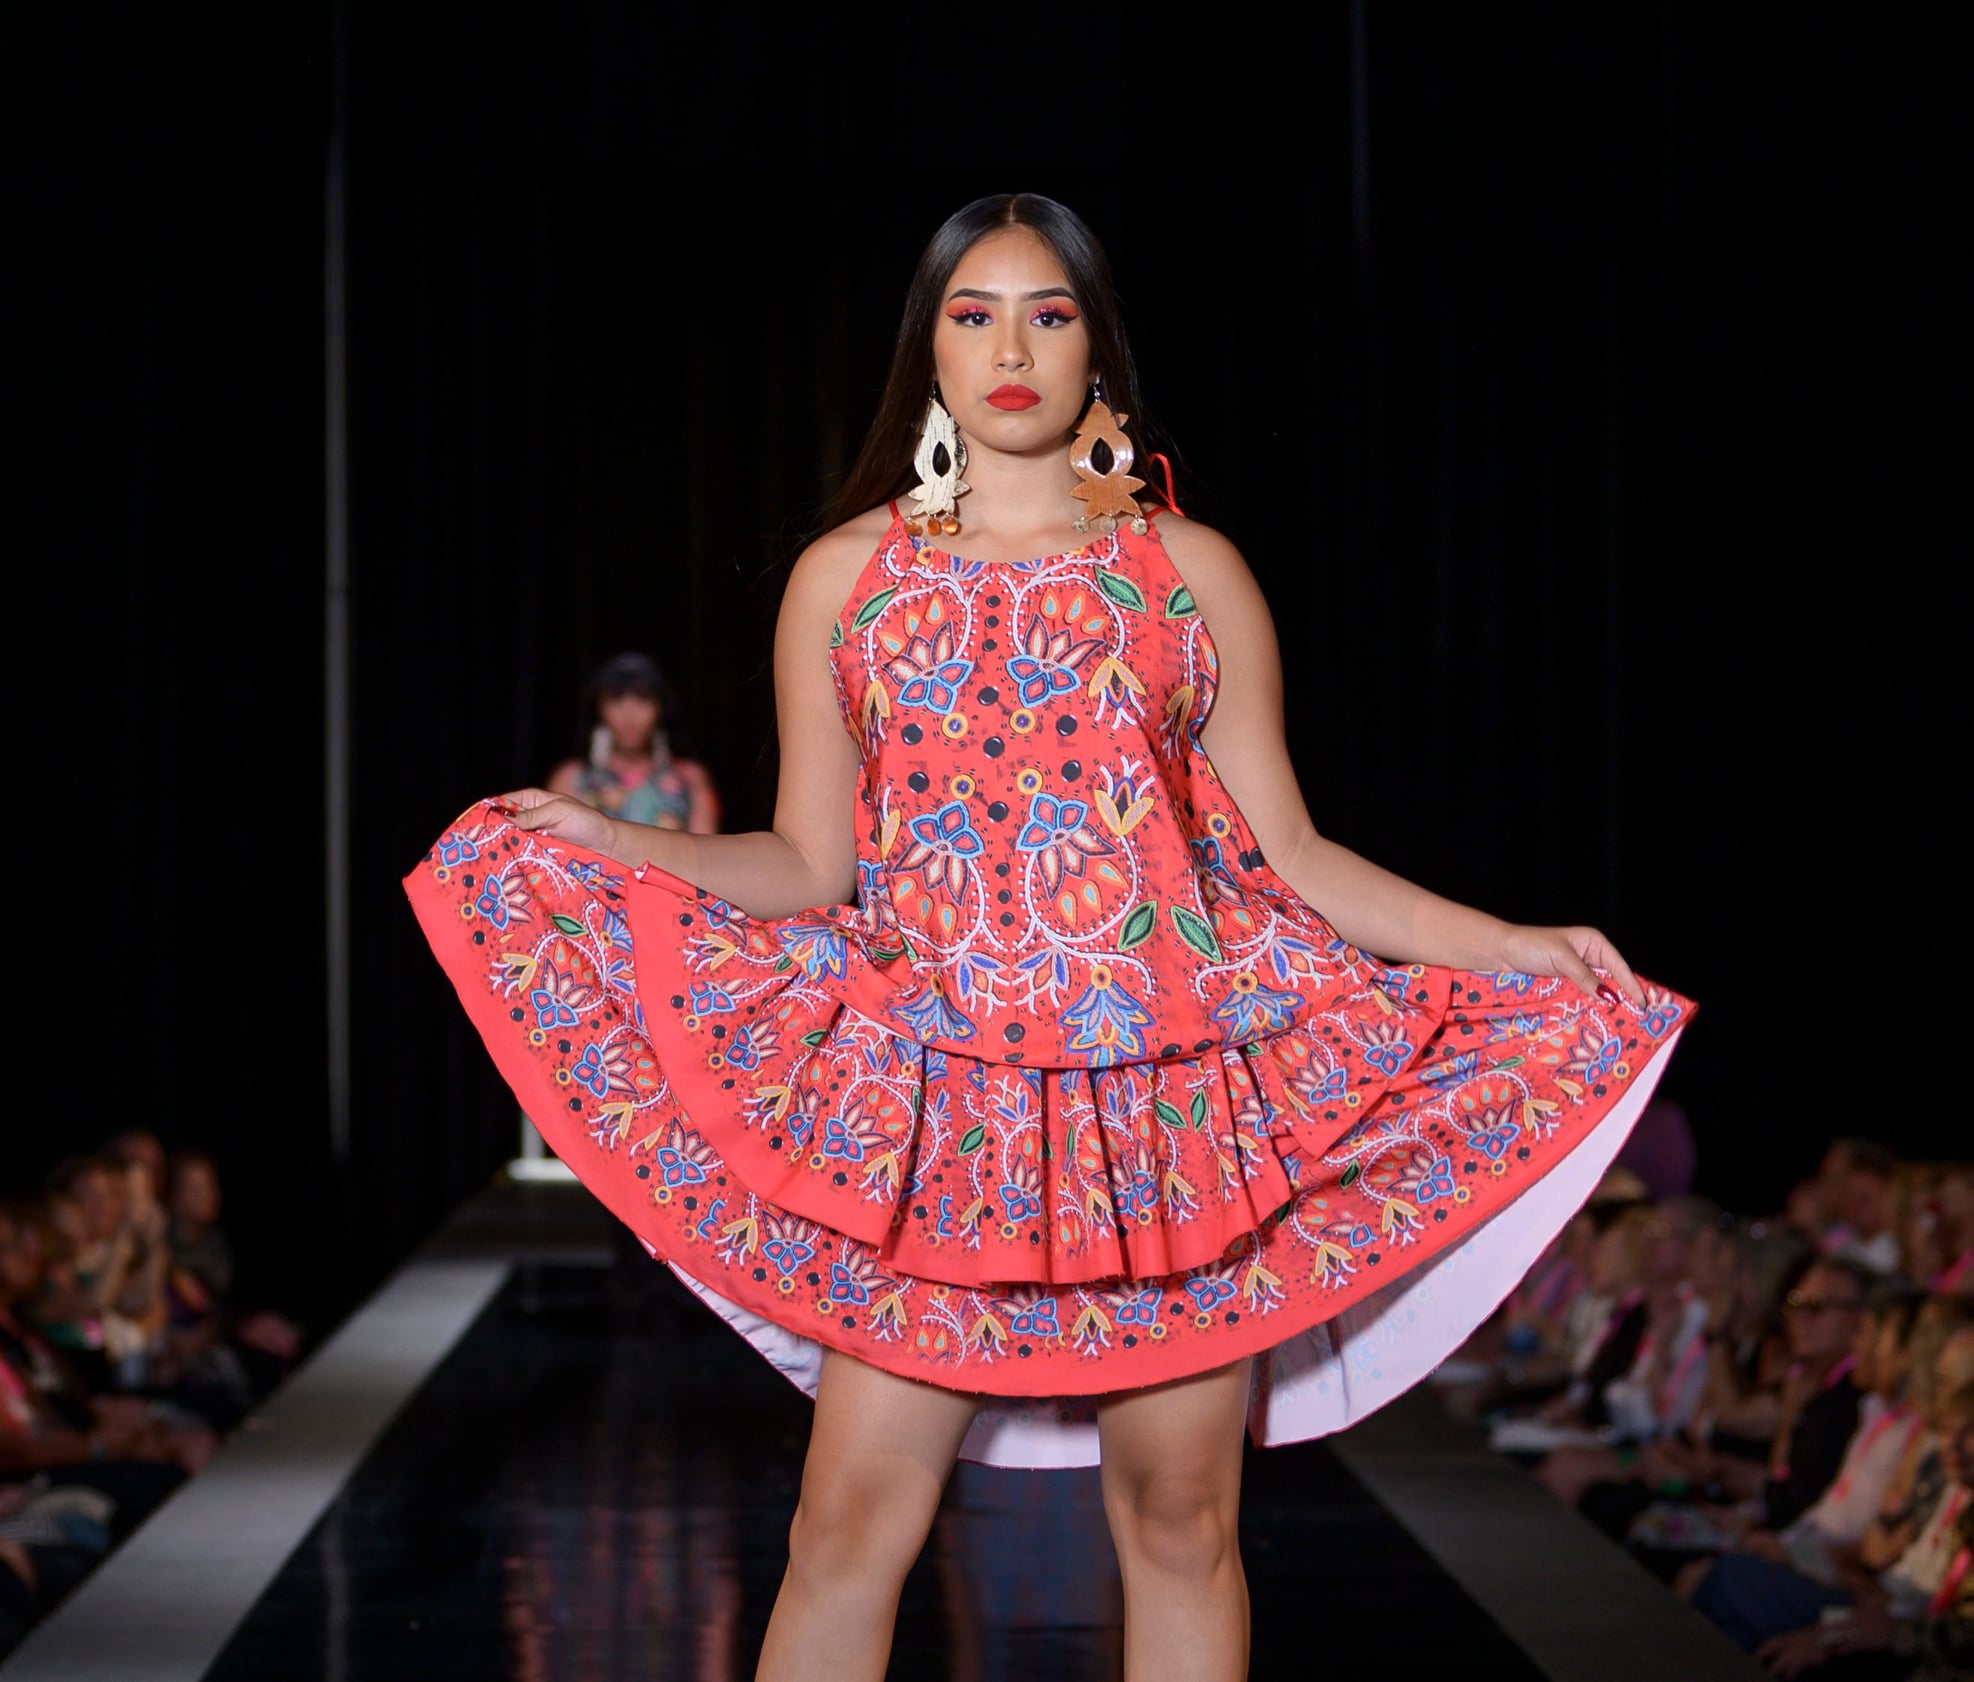 Fashions by Delina White of I Am Anishinaabe will be on display during the 2021 Indian Market Gala Reception, Fashion Show, and Auctions on Saturday, Aug. 21 at the Santa Fe Community Convention Center. (Photo/Jason S. Ordaz)  